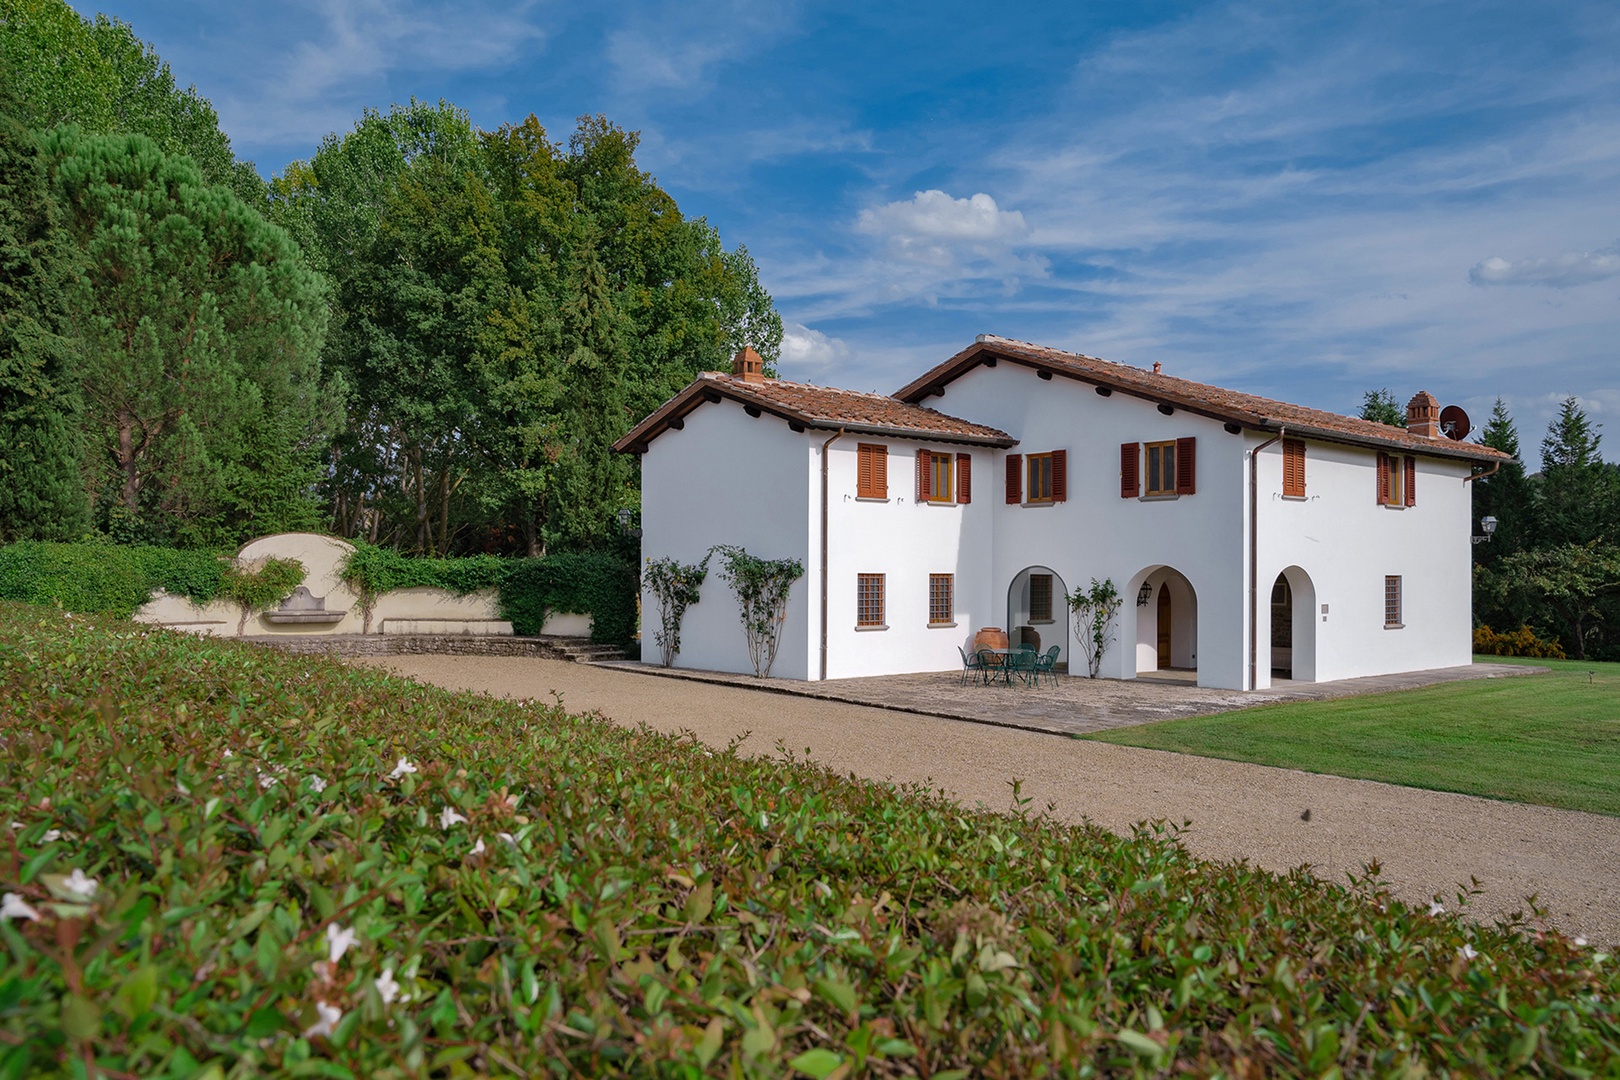 Villa Passera is a classic rustic Italian country home with a private pool and beautiful gardens.